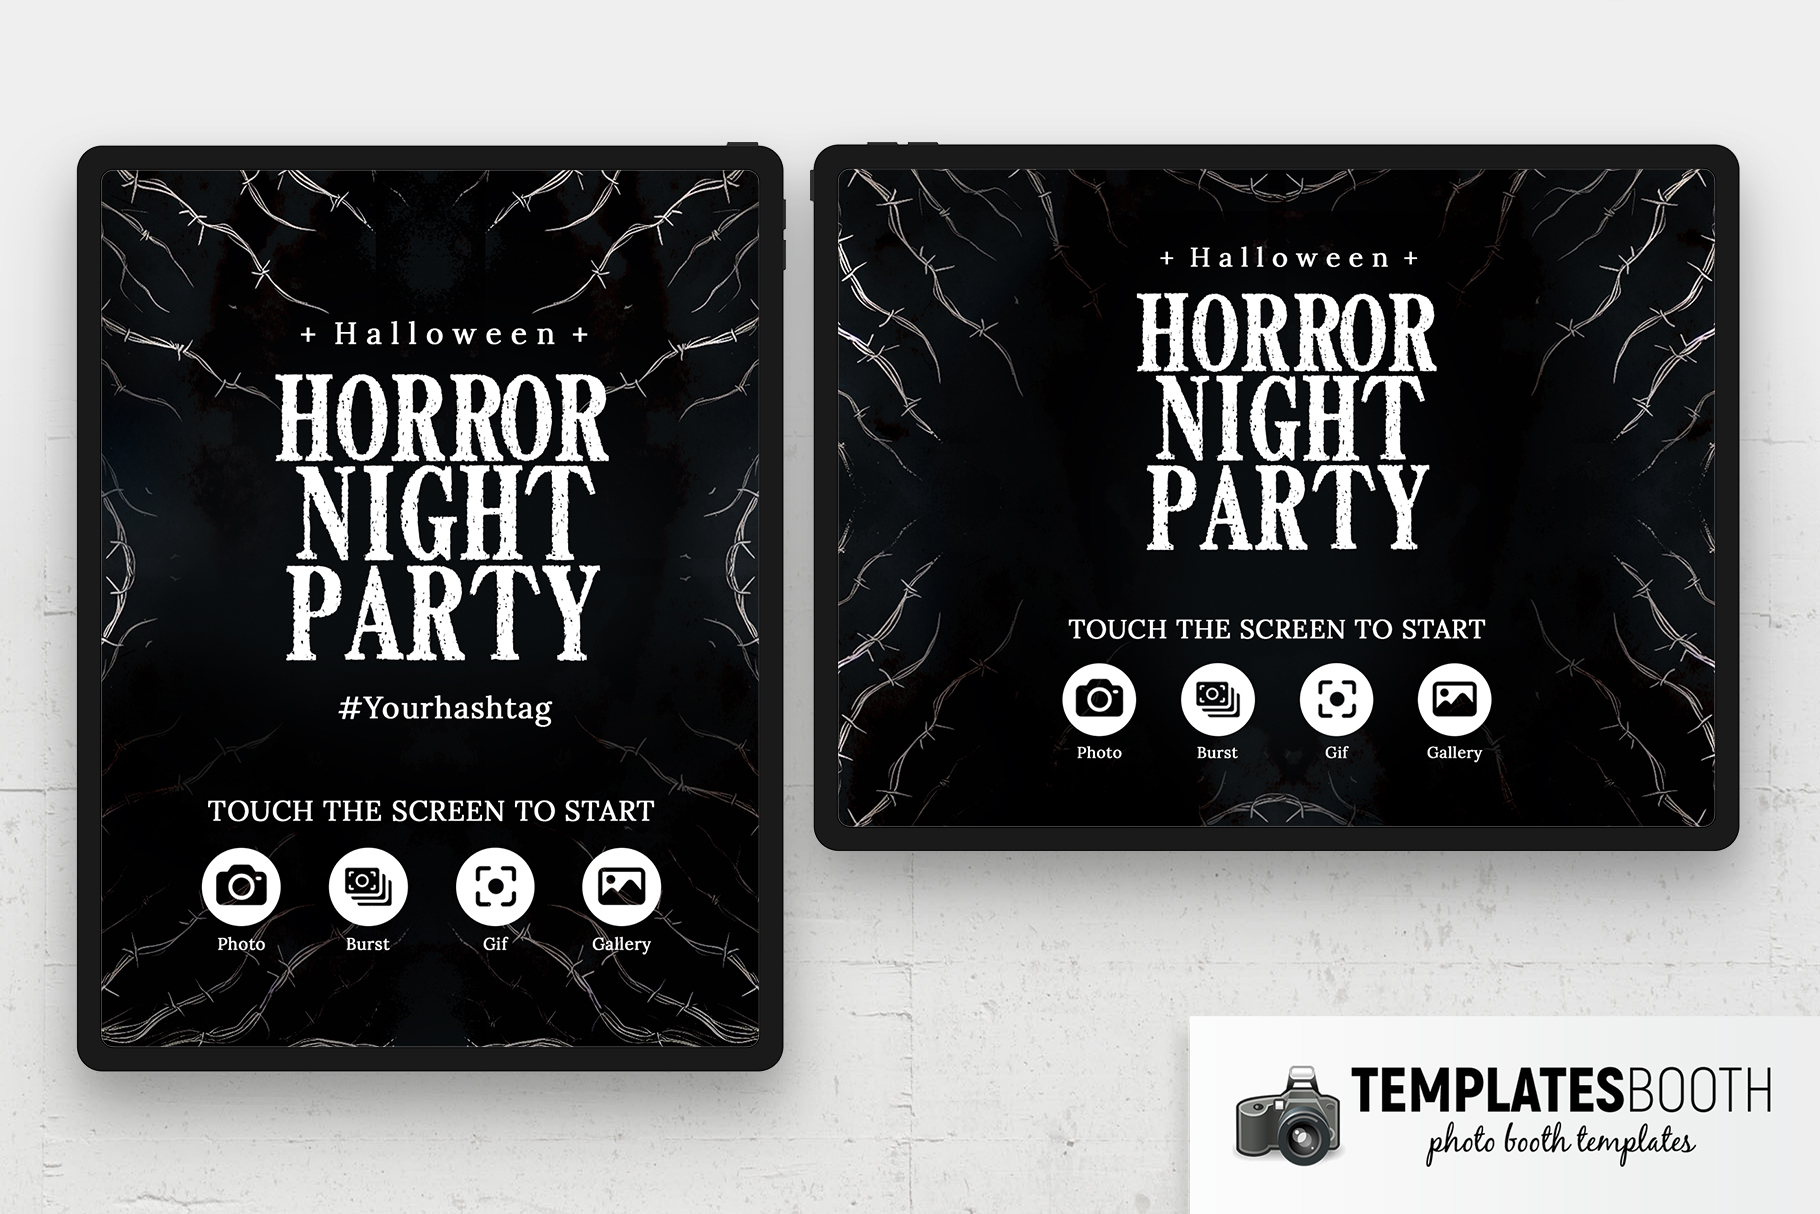 Horror Night Party Photo Booth Welcome Screen